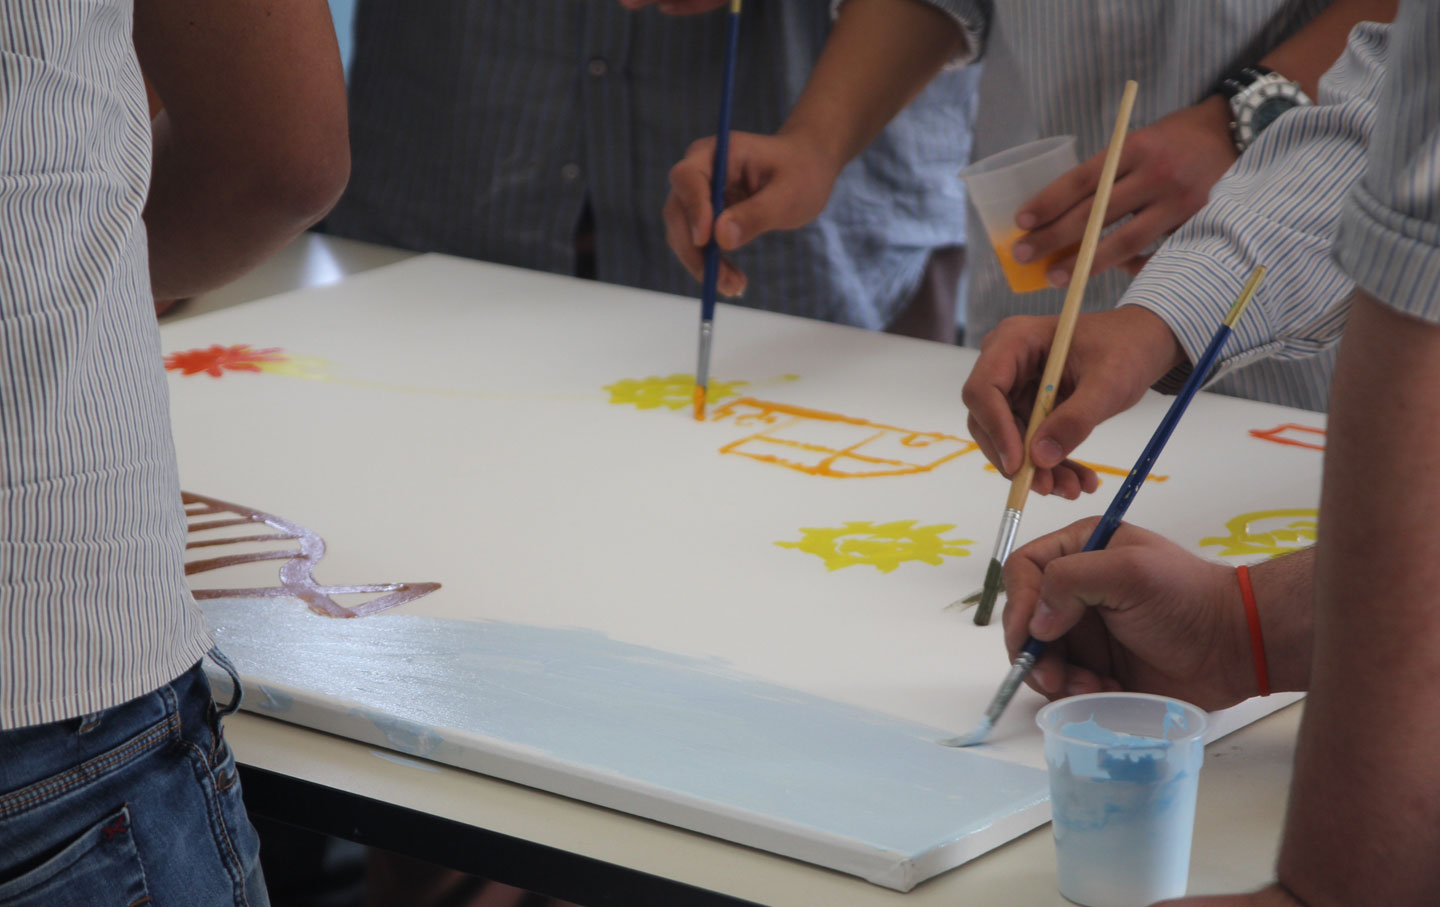 How Art Therapy Is Being Used to Help Syrian Children in Lebanon